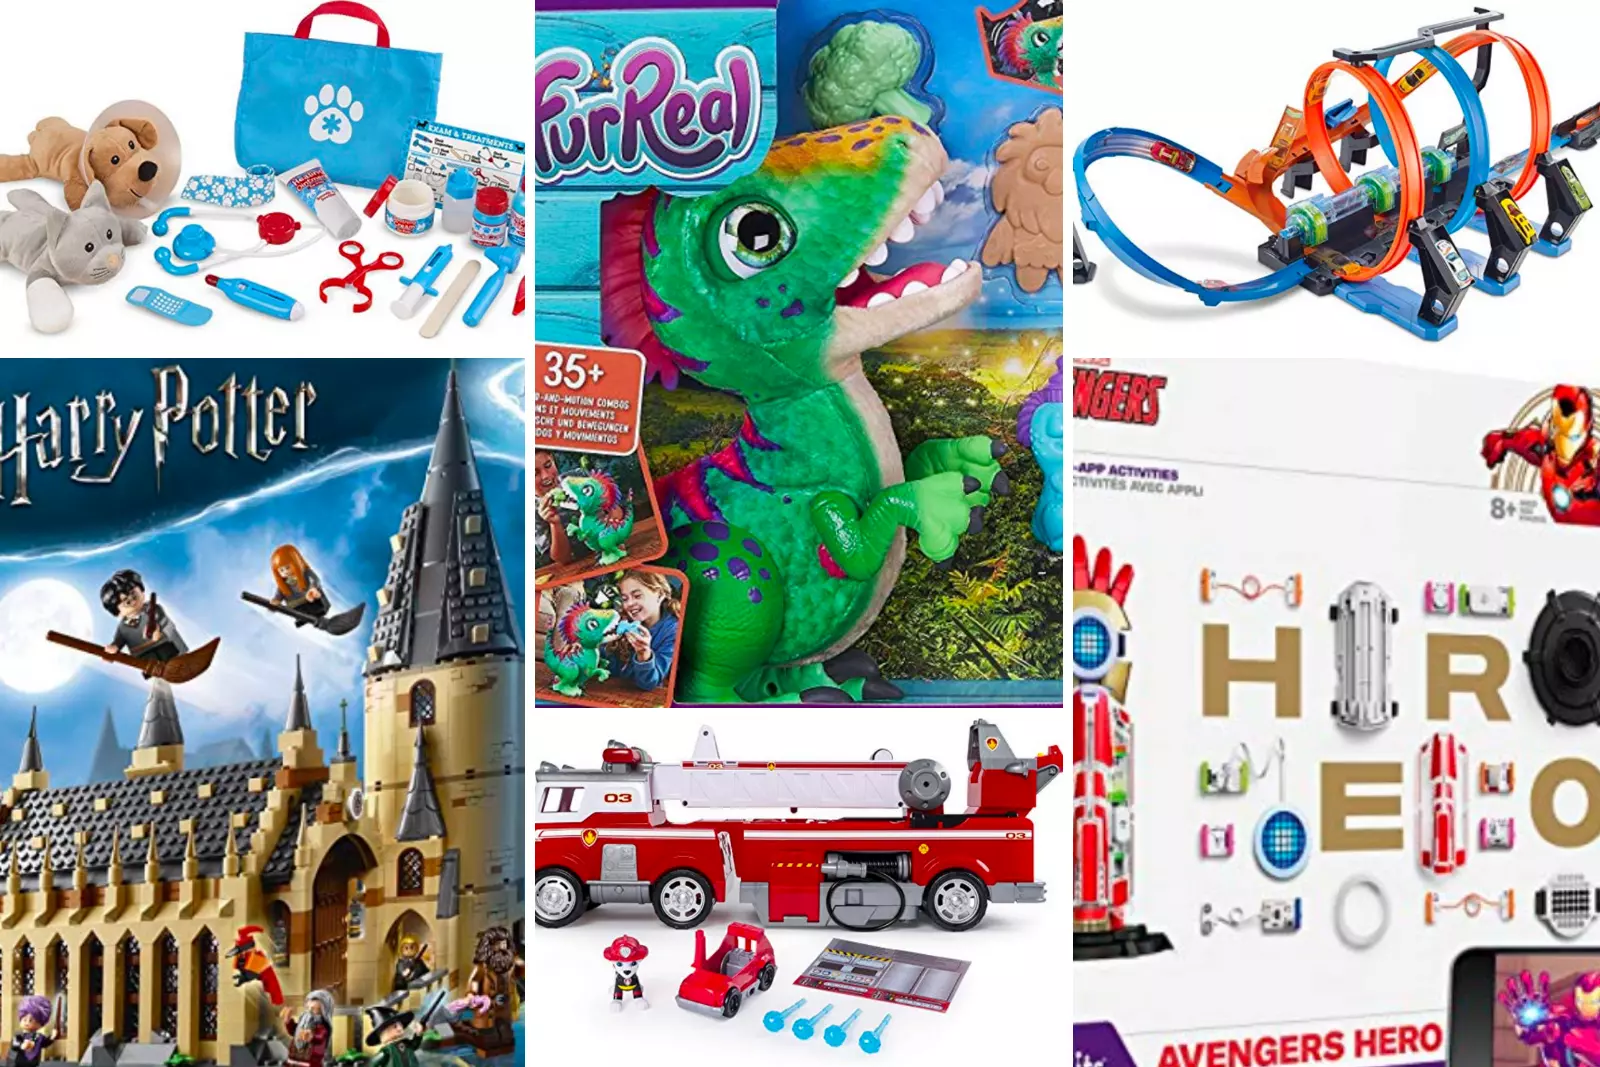 the hottest toys for 2018 christmas